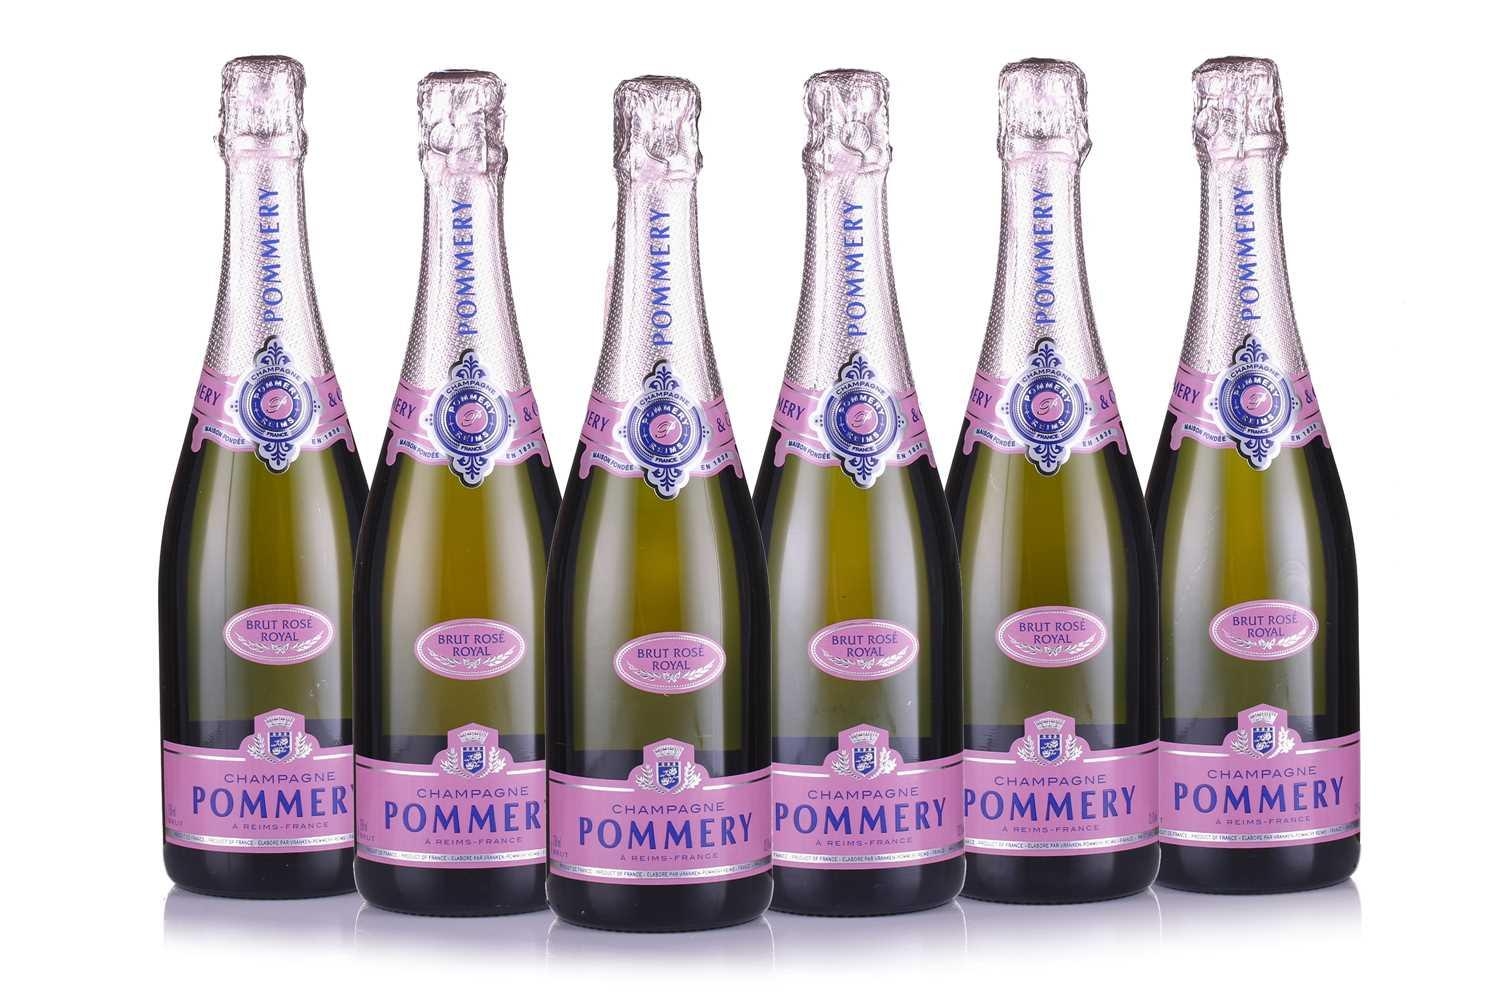 Six bottles of Pommery Brut Rose Royal Champagne, in cartons. Qty: (6)